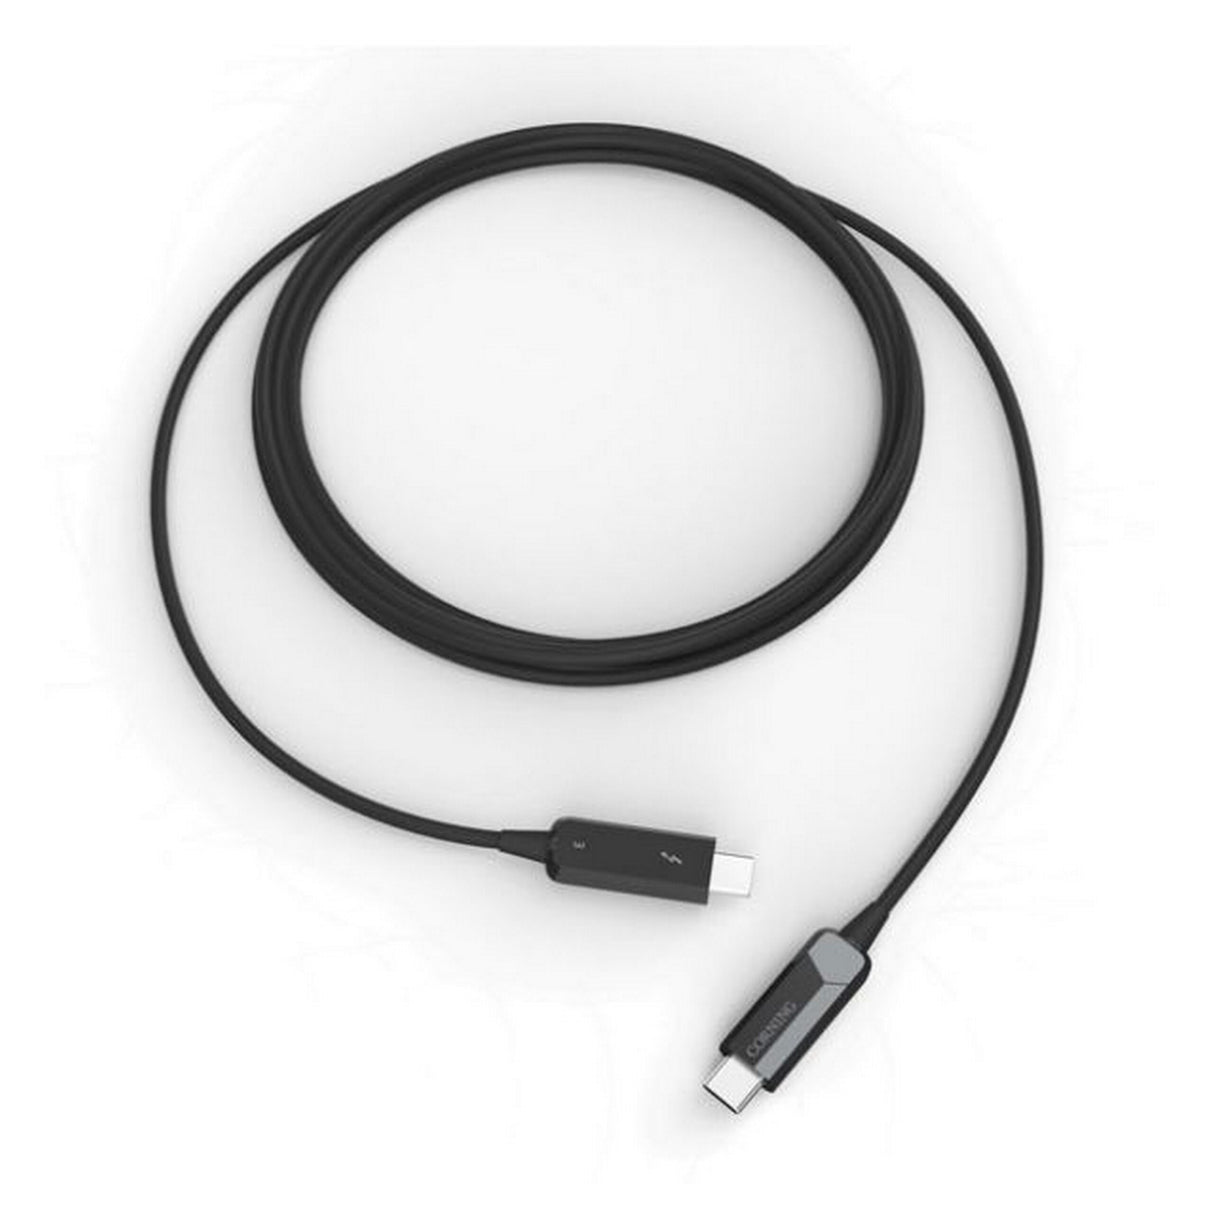 Corning 25 Meter Thunderbolt 3 USB-C Optical Cable